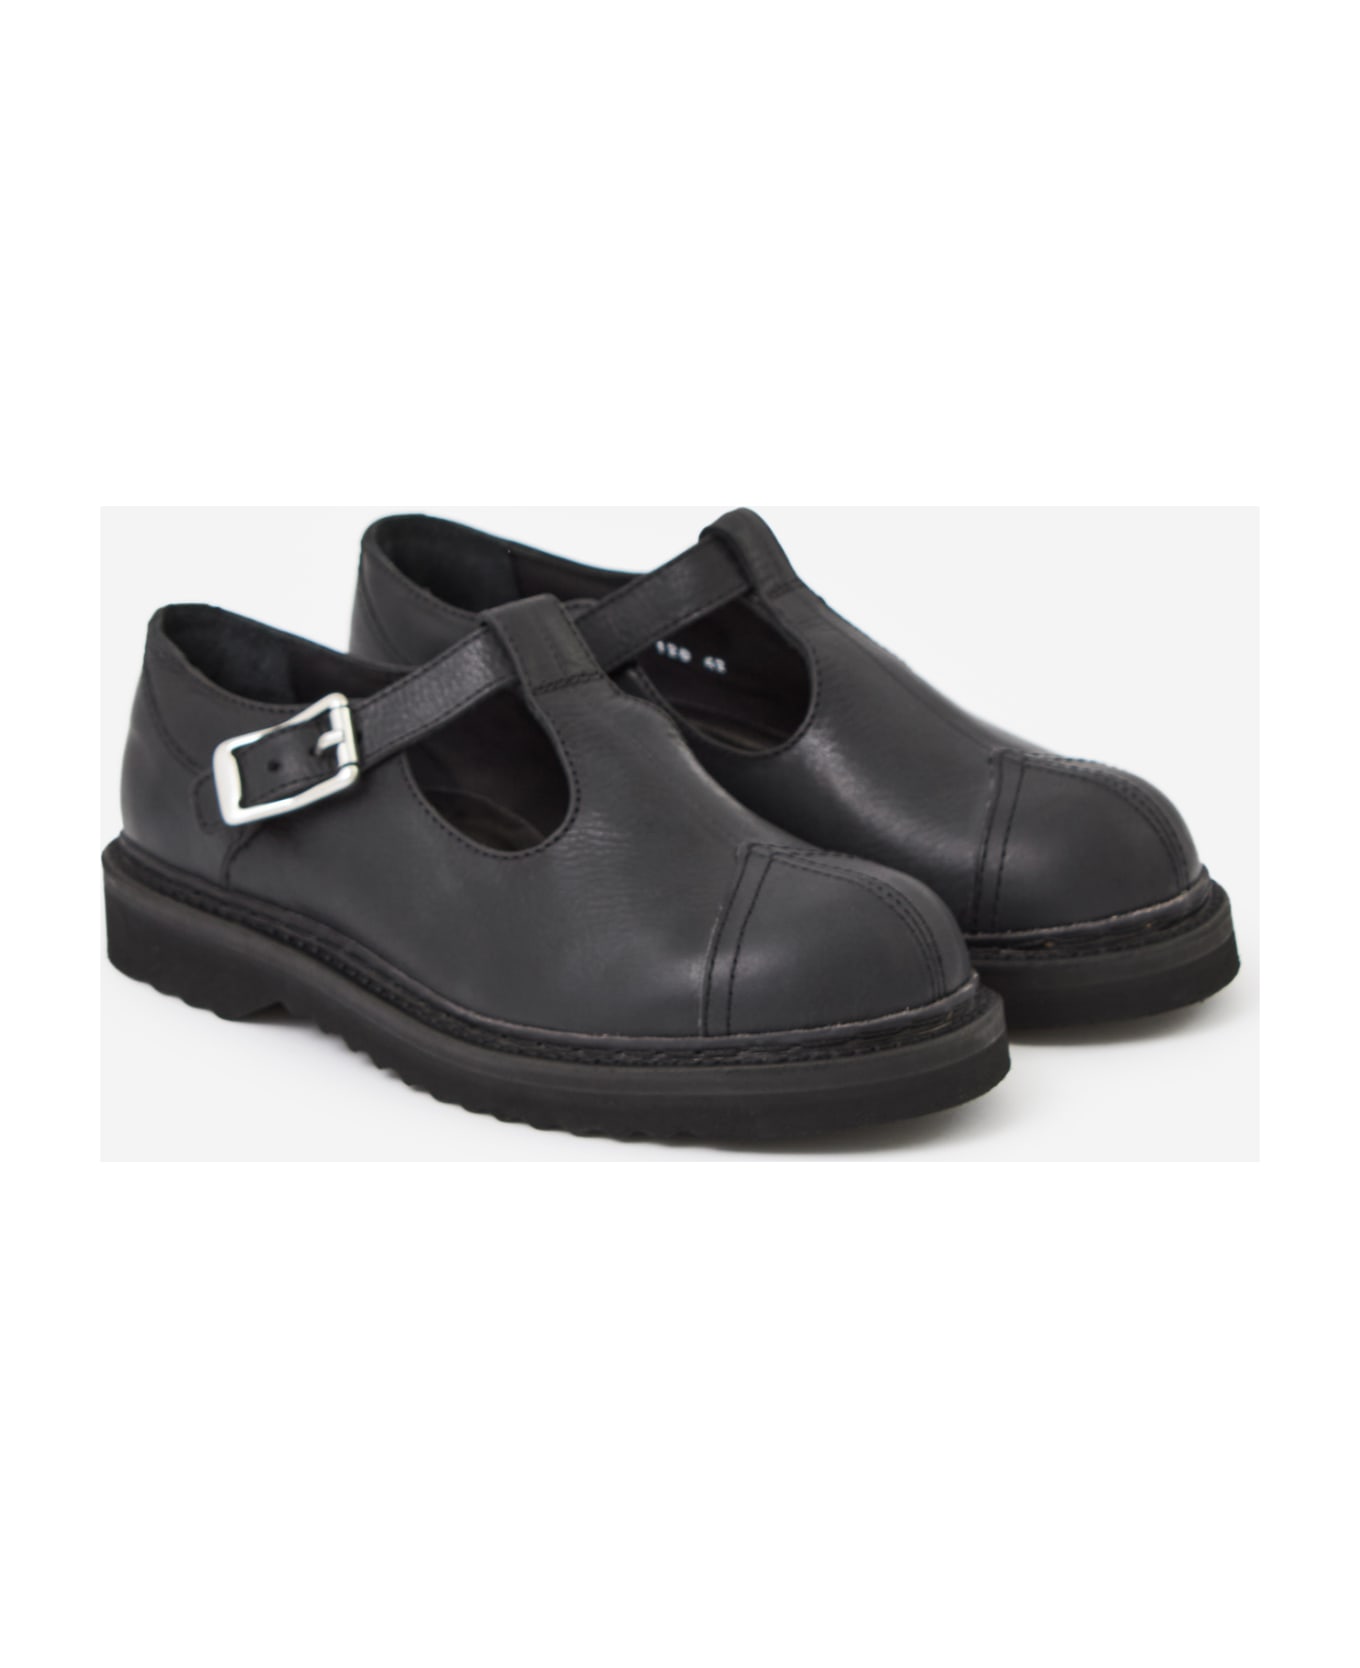 Our Legacy Camden Shoe Shoes - black